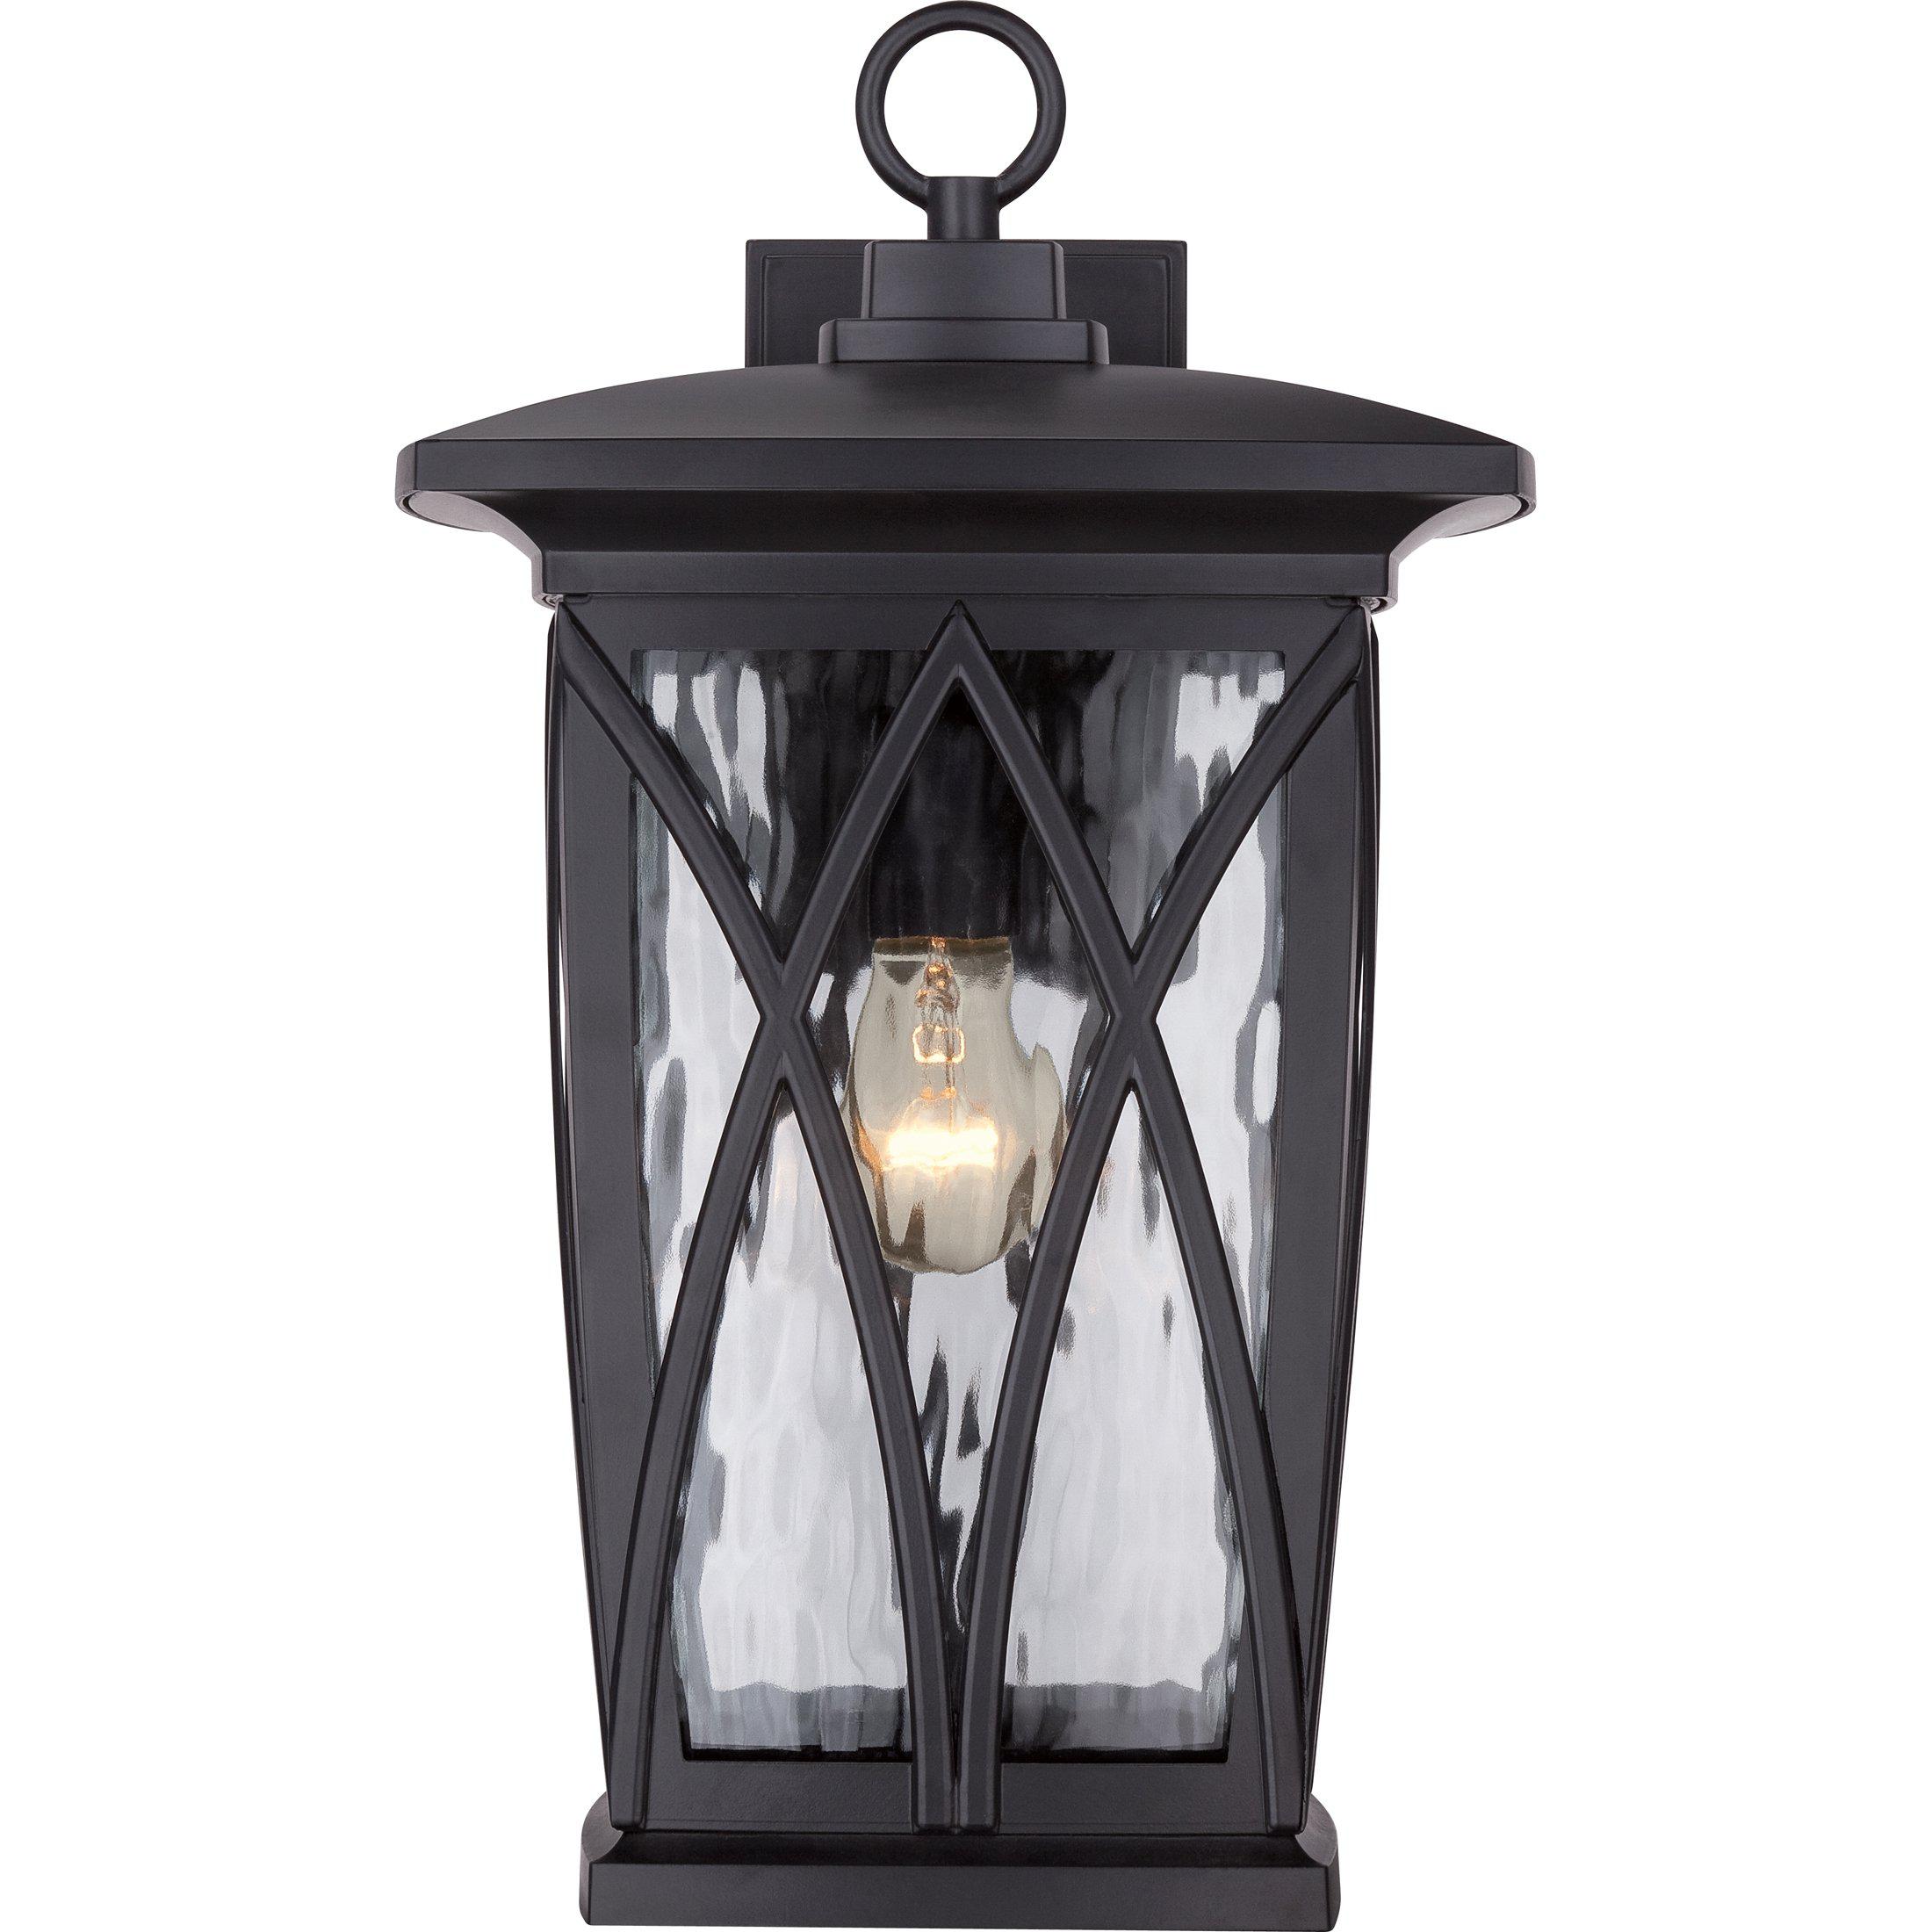 Quoizel Grover Outdoor Lantern, Large